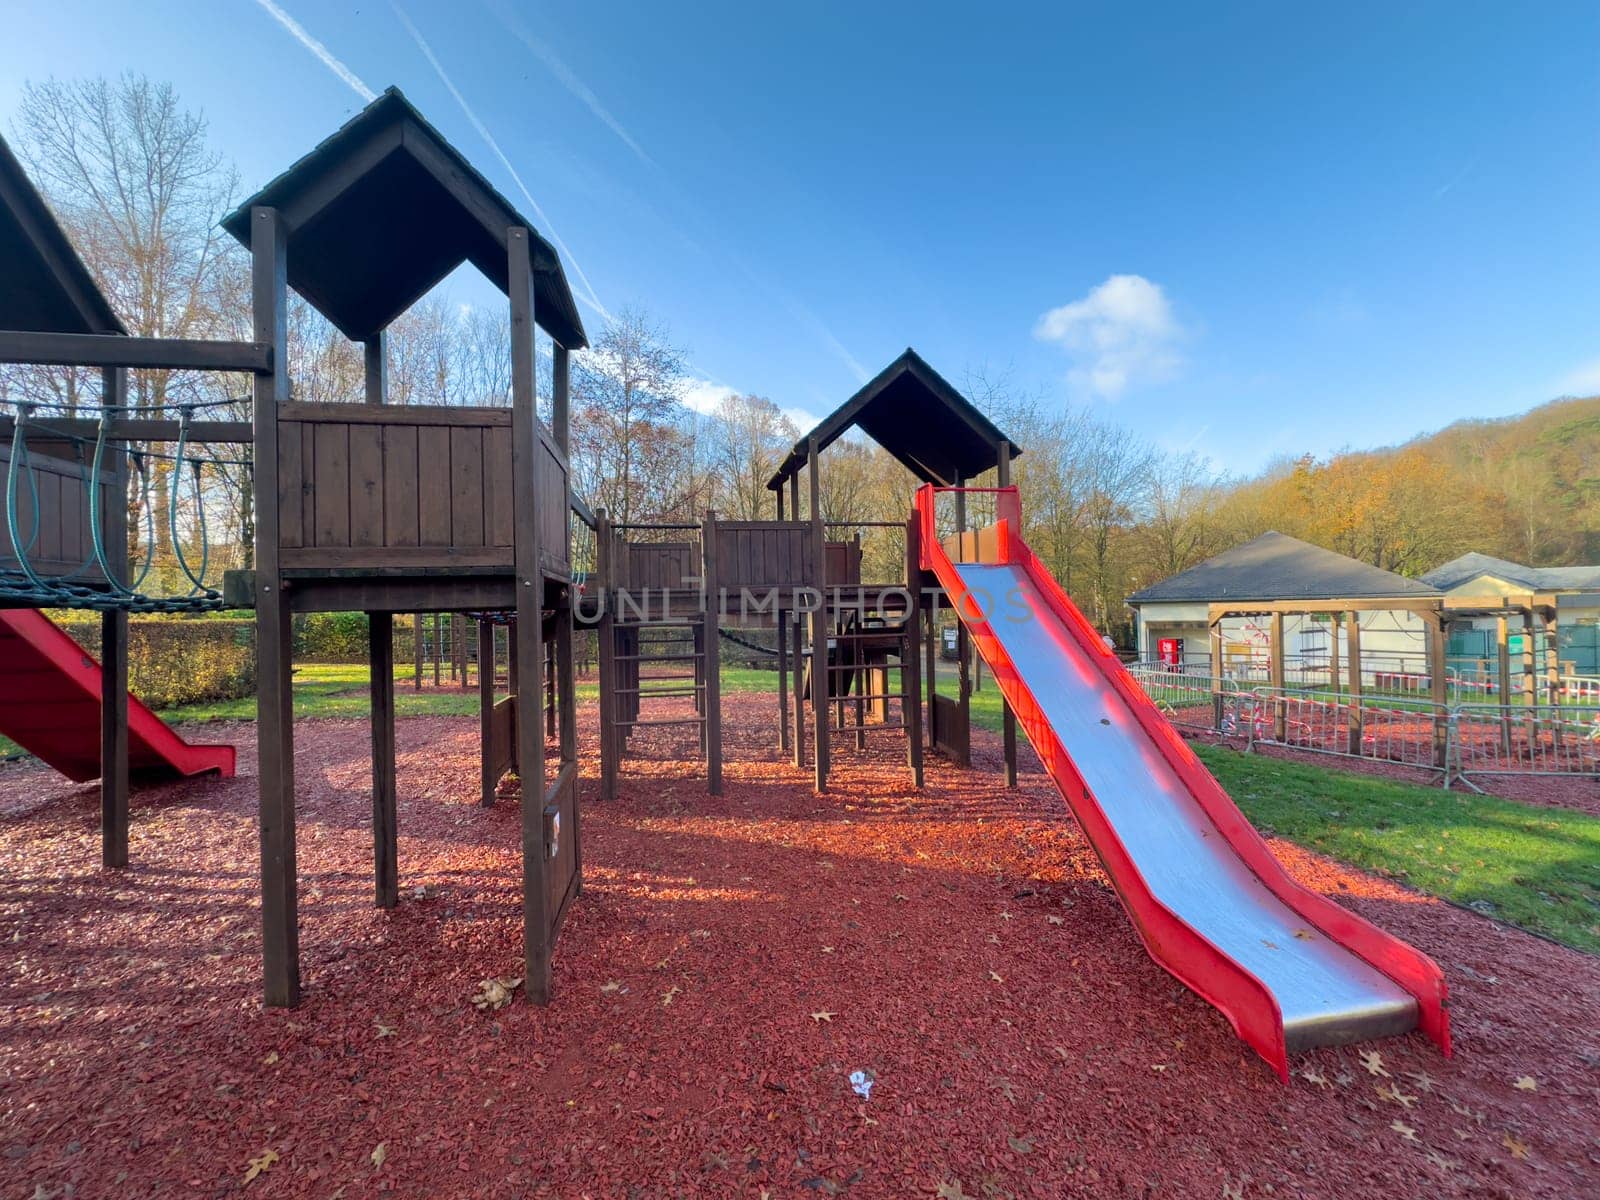 Colorful playground with climbing stairs and slides on yard in the park.